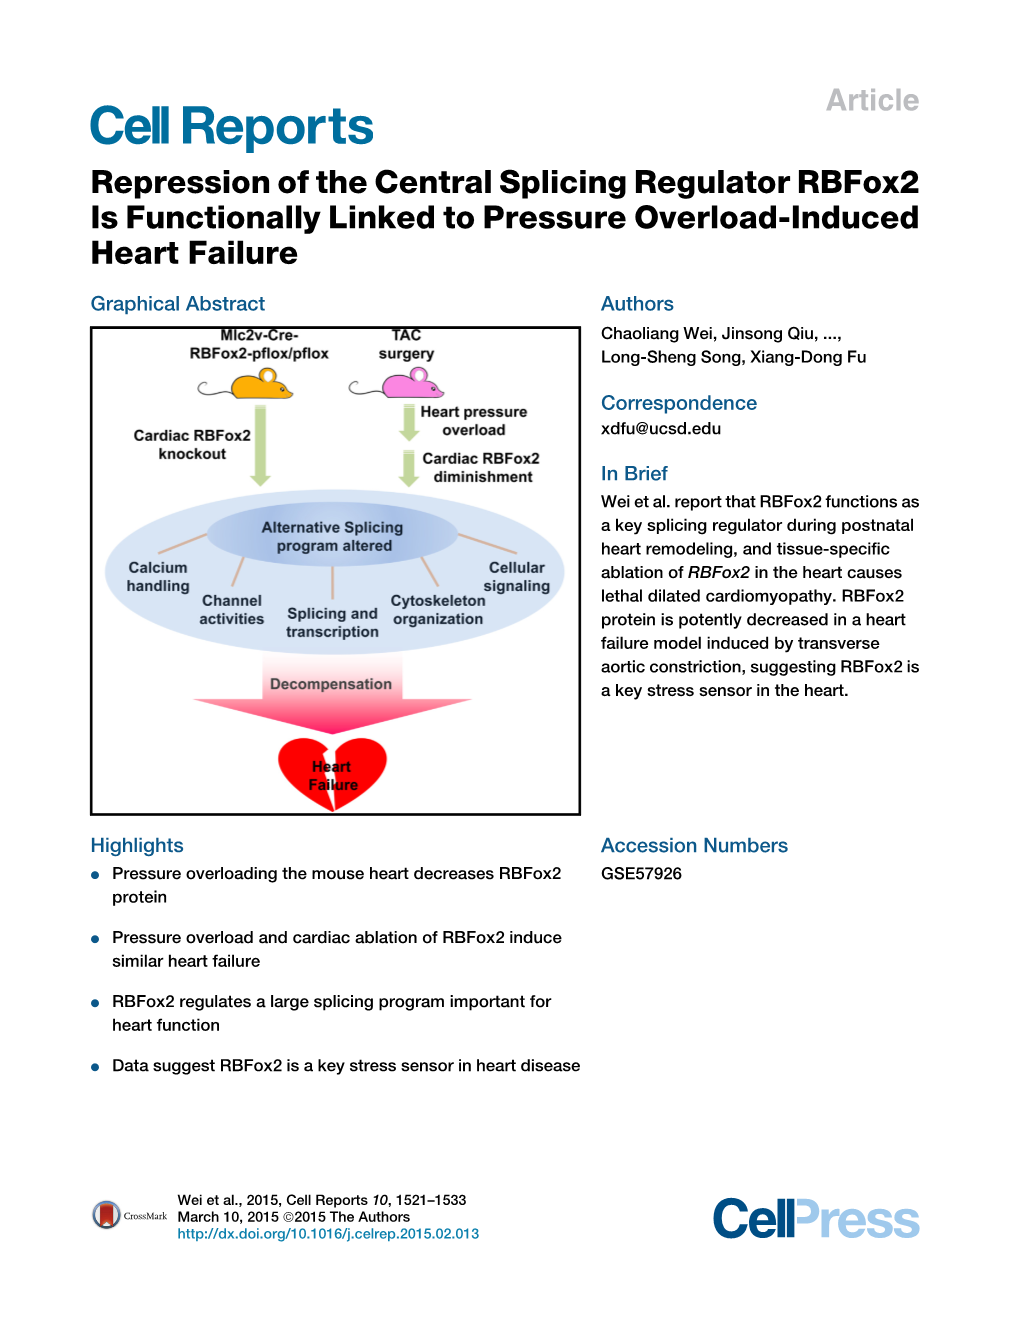 Repression of the Central Splicing Regulator Rbfox2 Is Functionally Linked to Pressure Overload-Induced Heart Failure